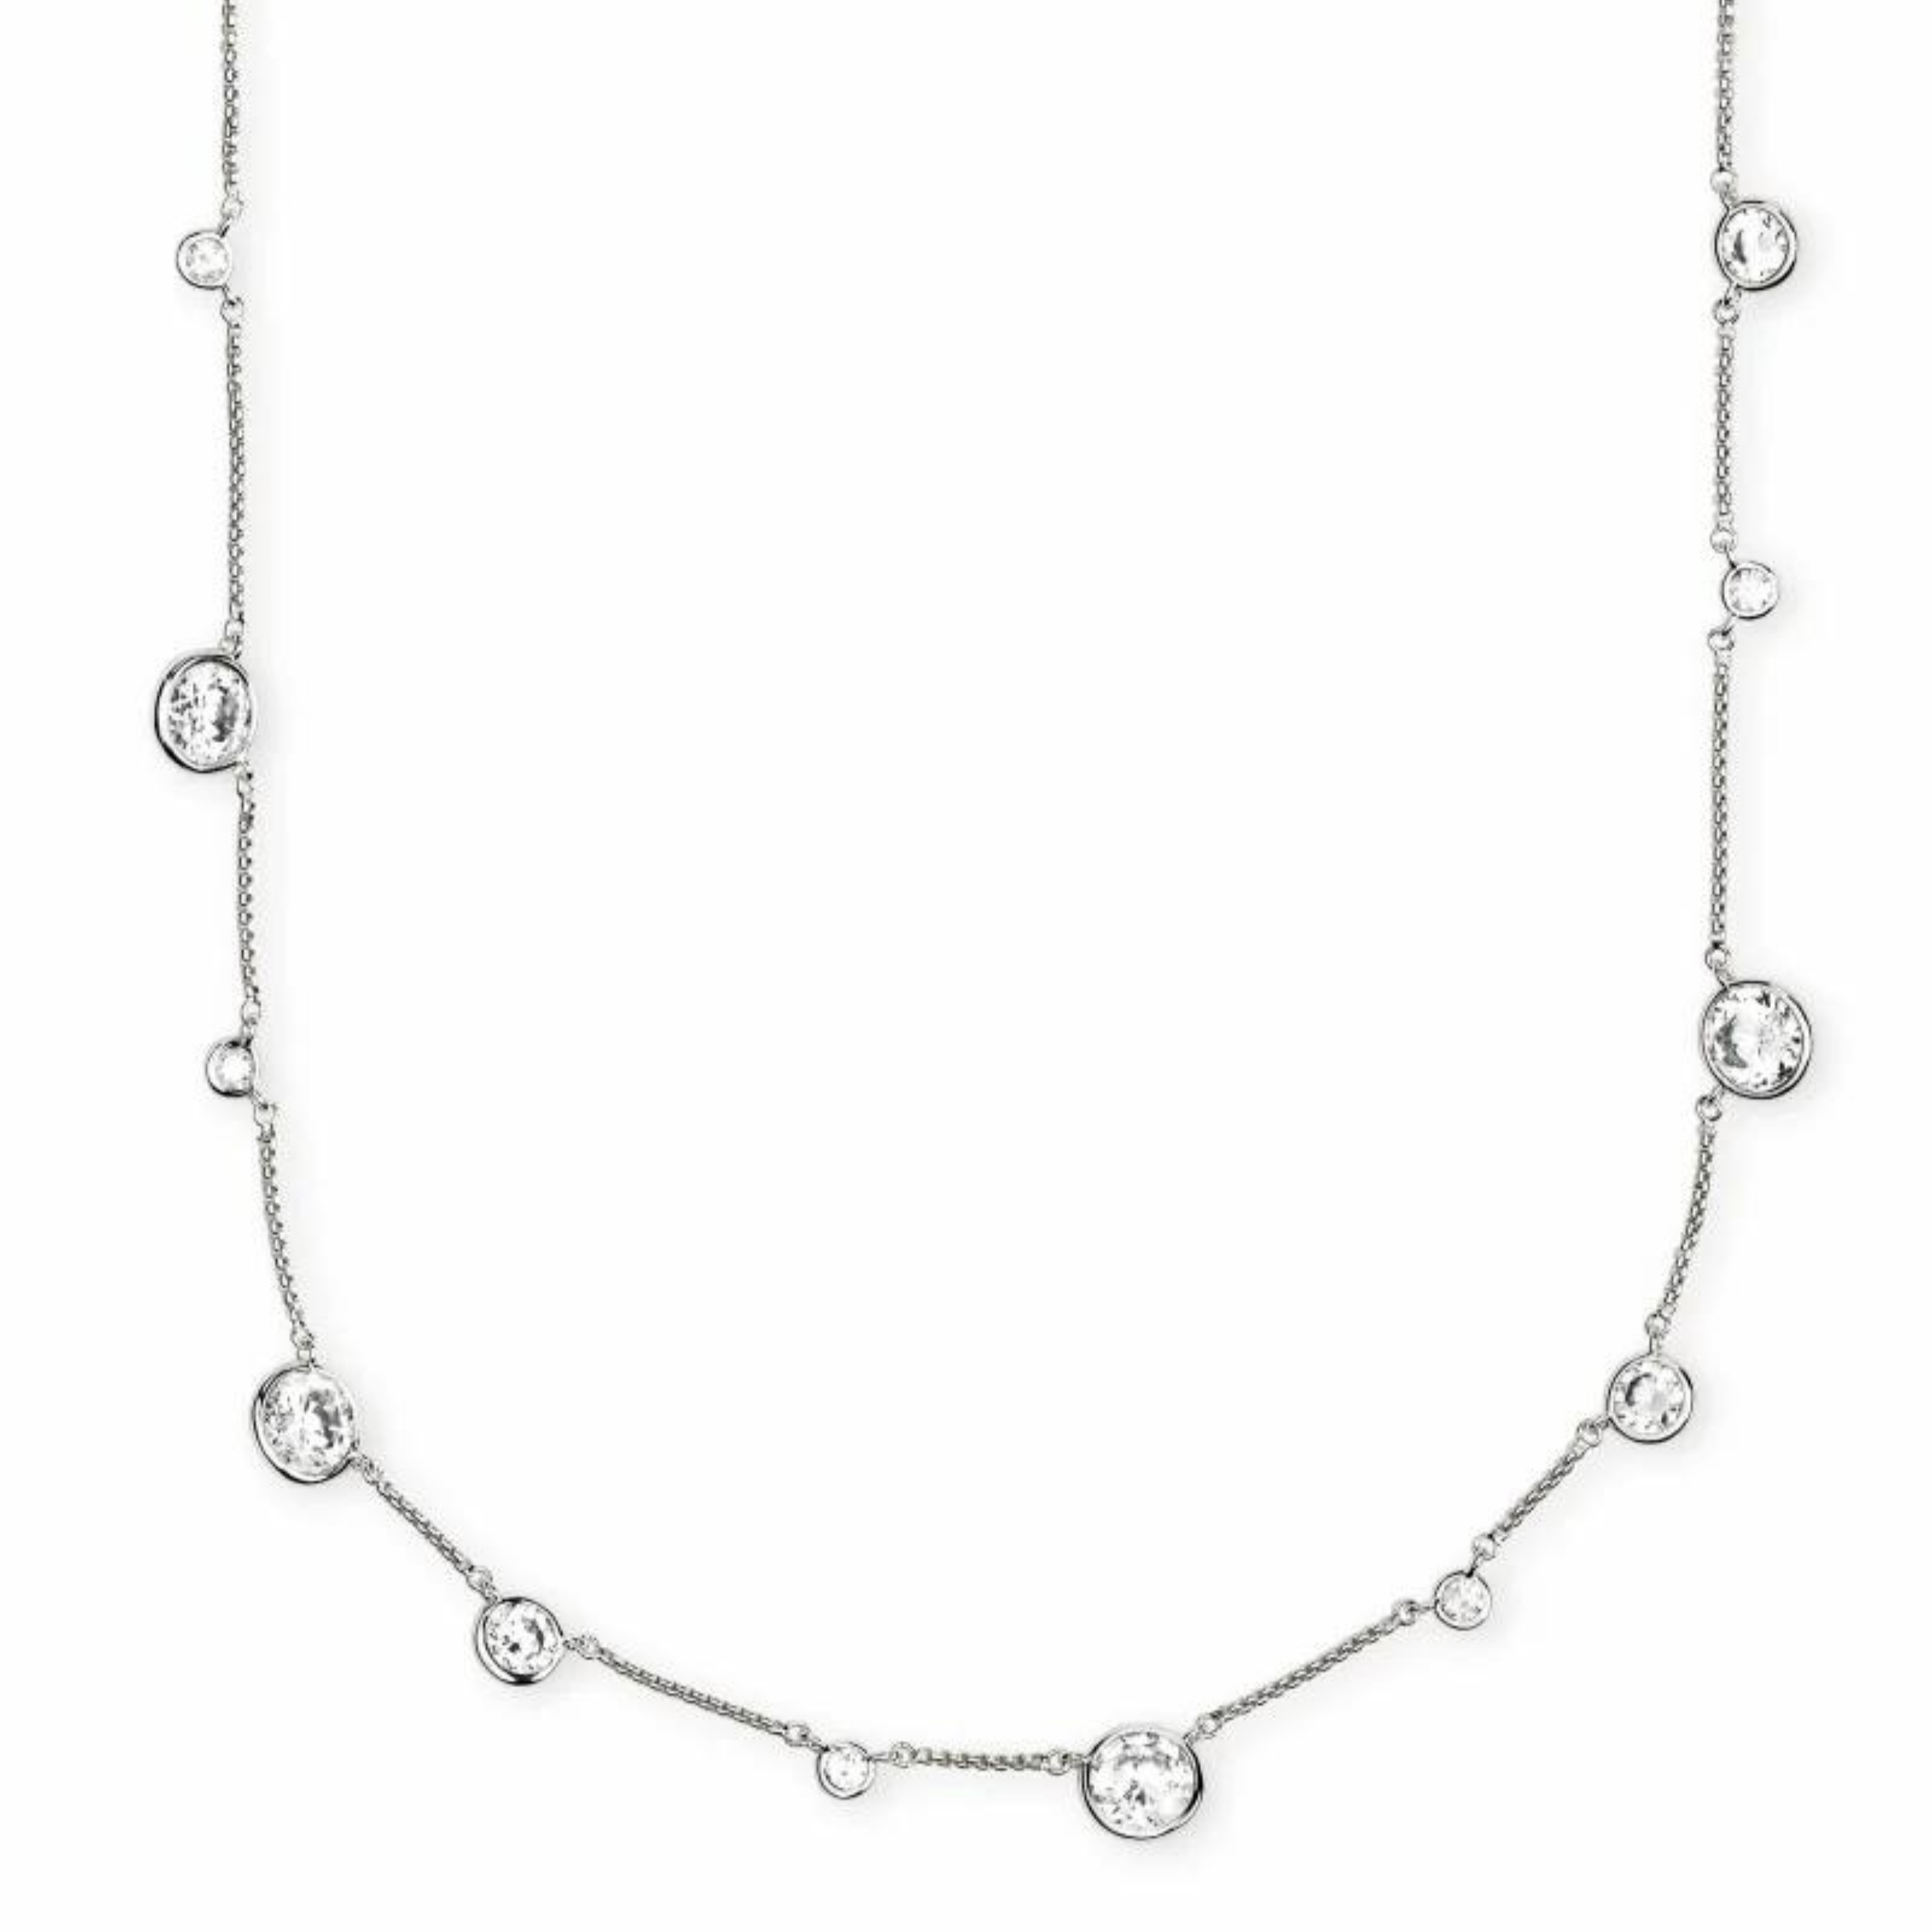 Silver chain necklace with white crystal charms in different shapes. This necklace is pictured on a white background.